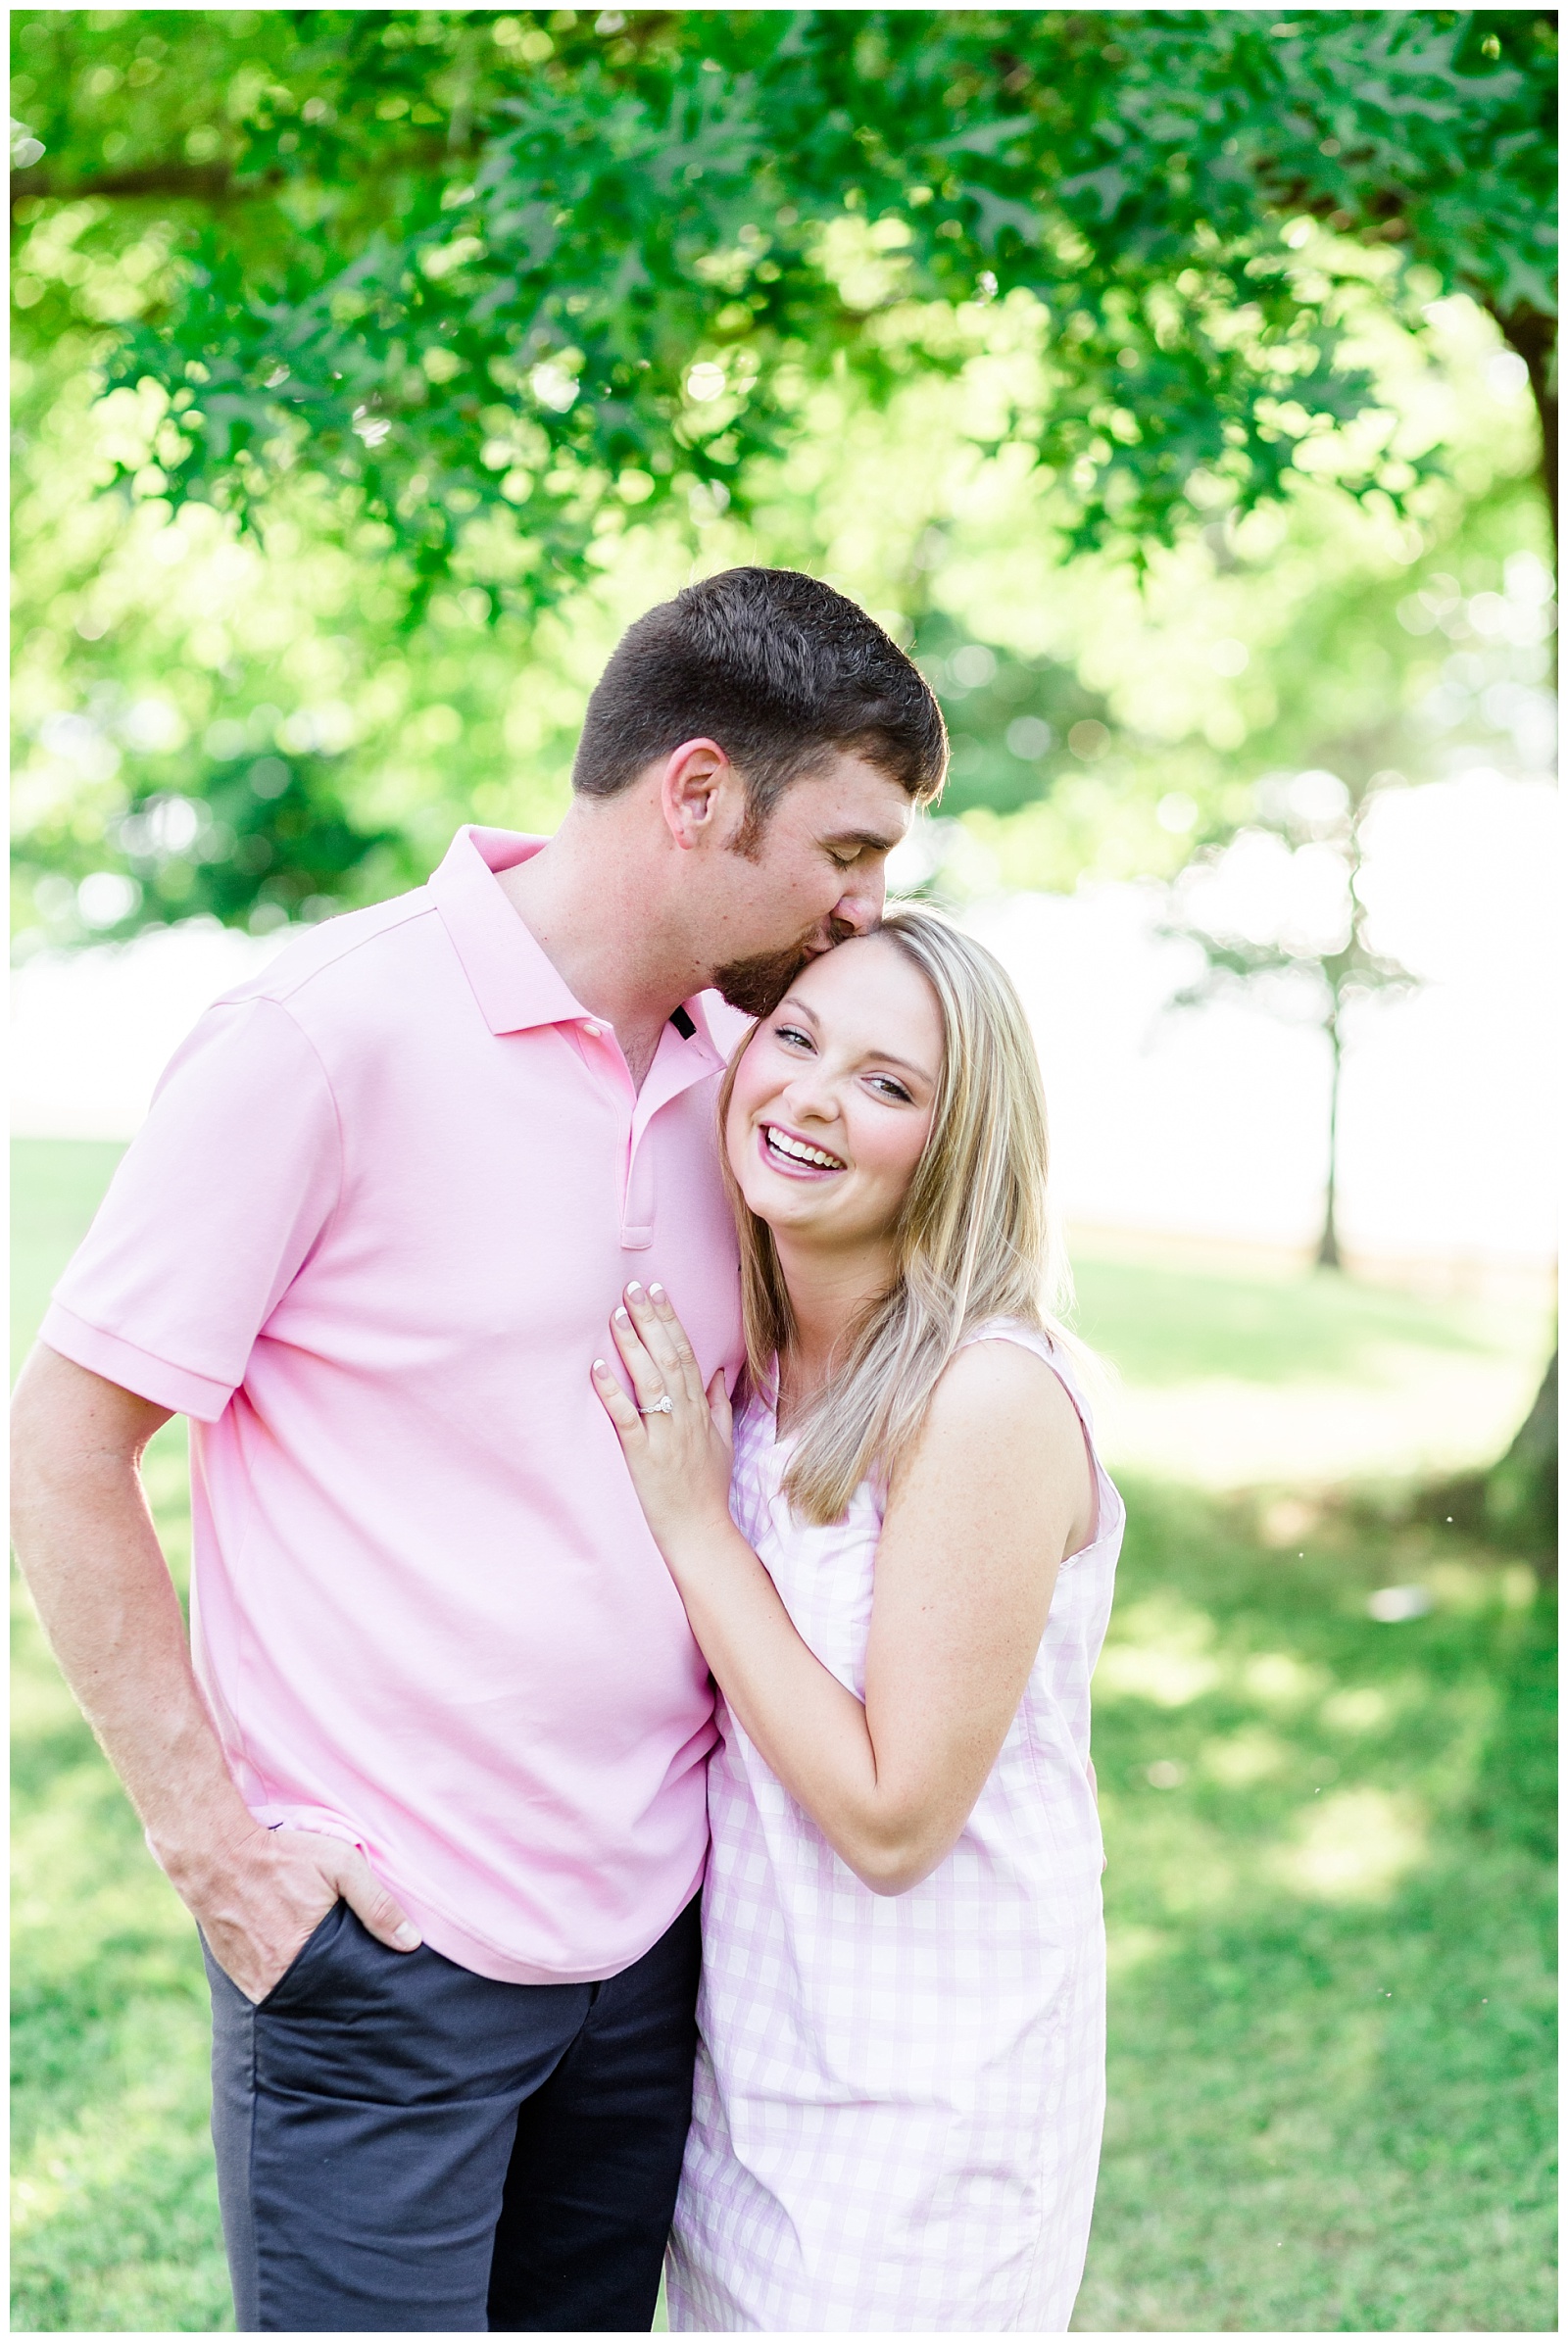 spring lake engagement session in pastel pink outfits